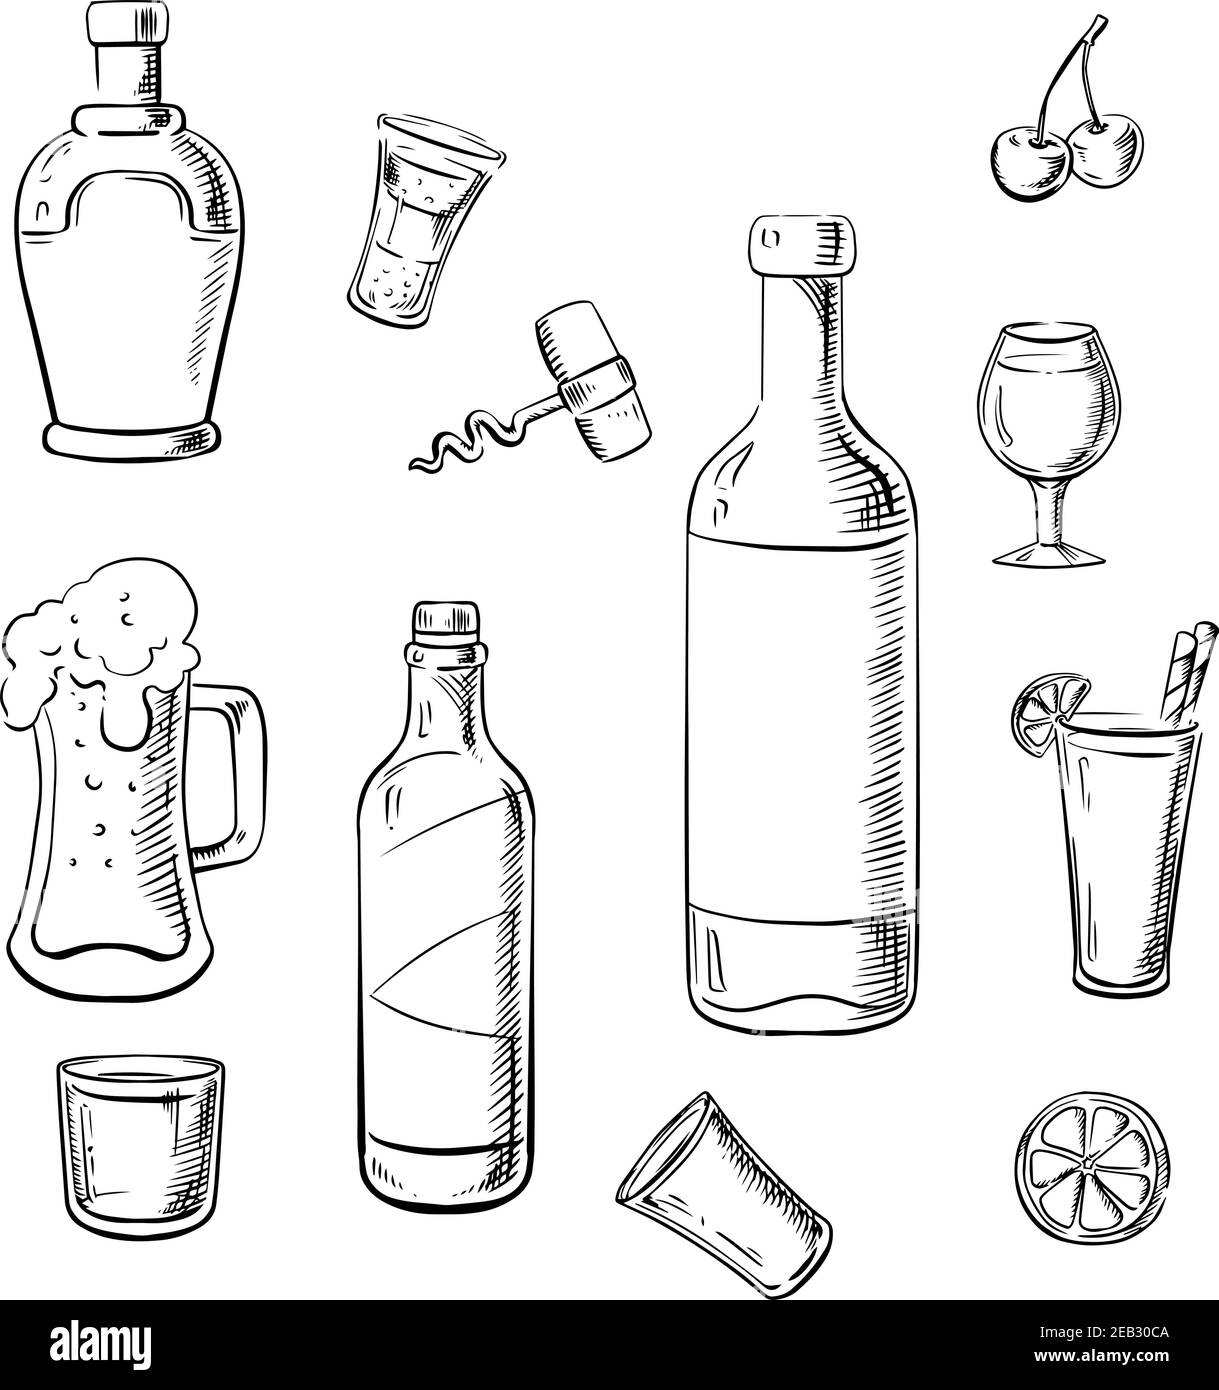 Wine bottles, whiskey, liquor, beer and cocktails with lemons, cherries and corkscrew. Sketch icons for food and drinks design Stock Vector